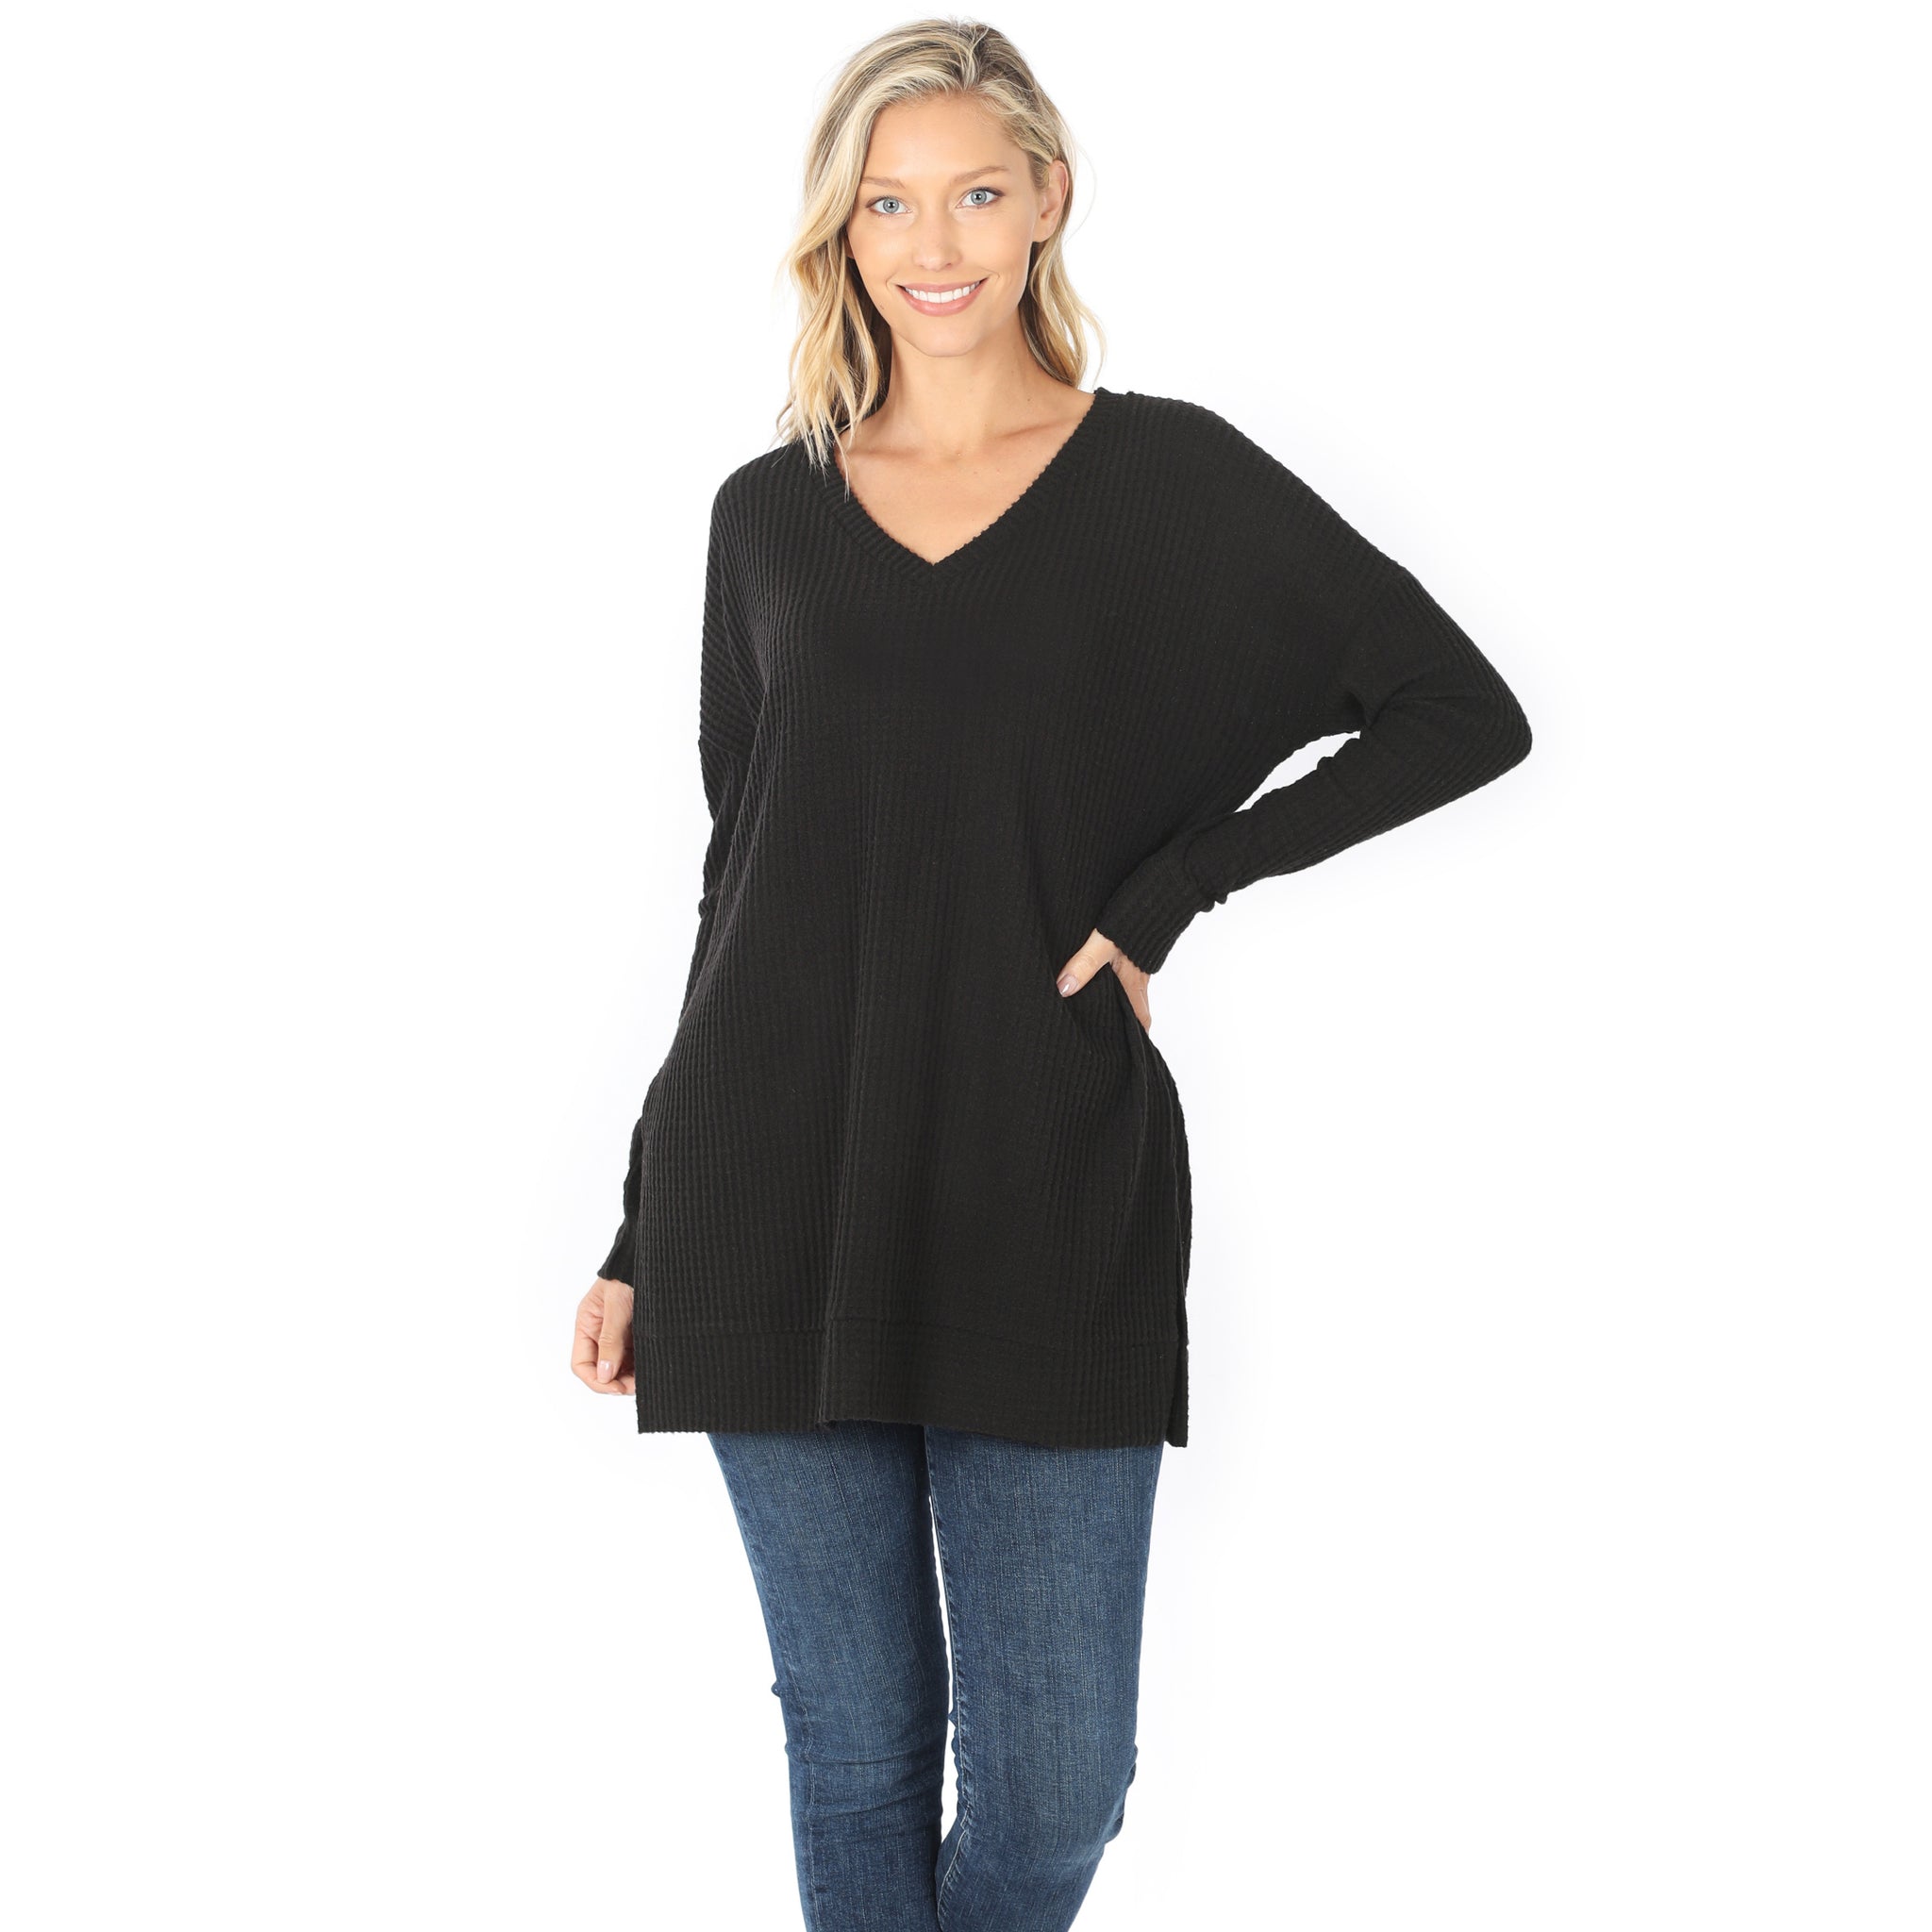 Brushed Thermal Waffle Neck Sweater Tunic Top Black